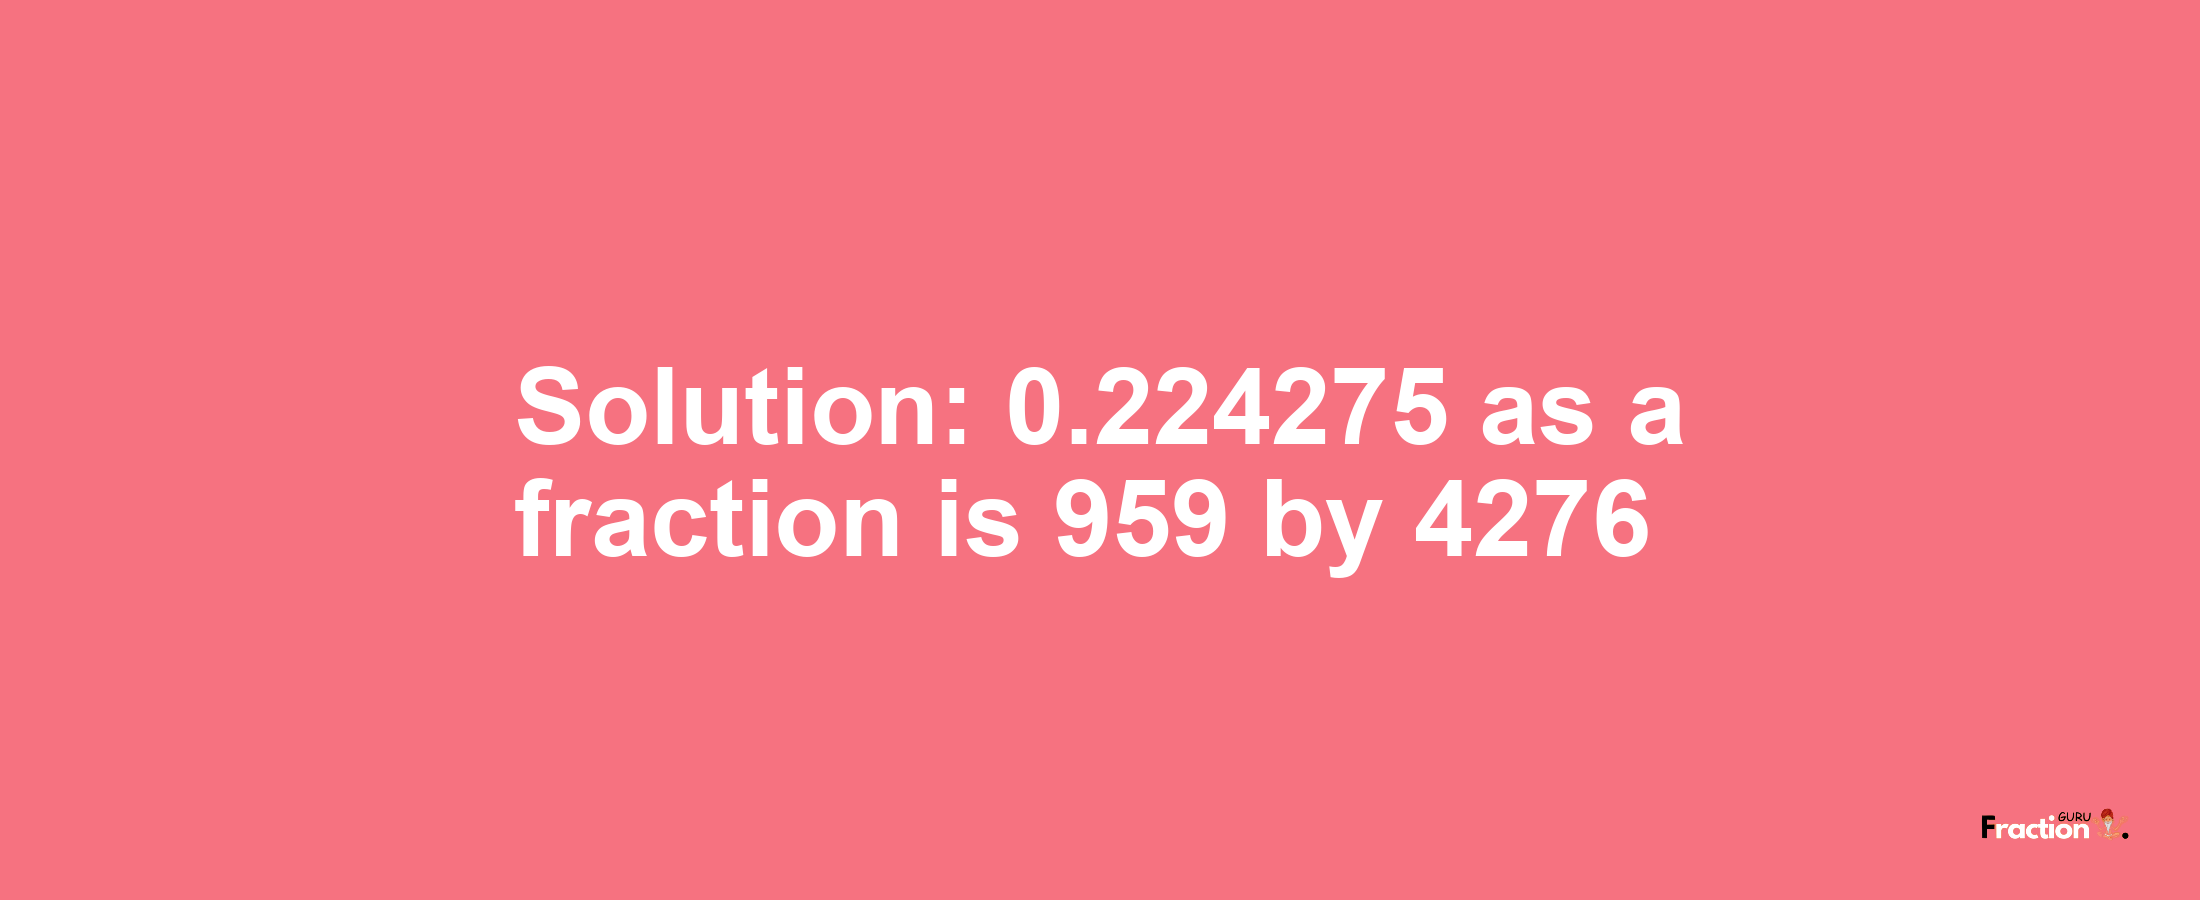 Solution:0.224275 as a fraction is 959/4276